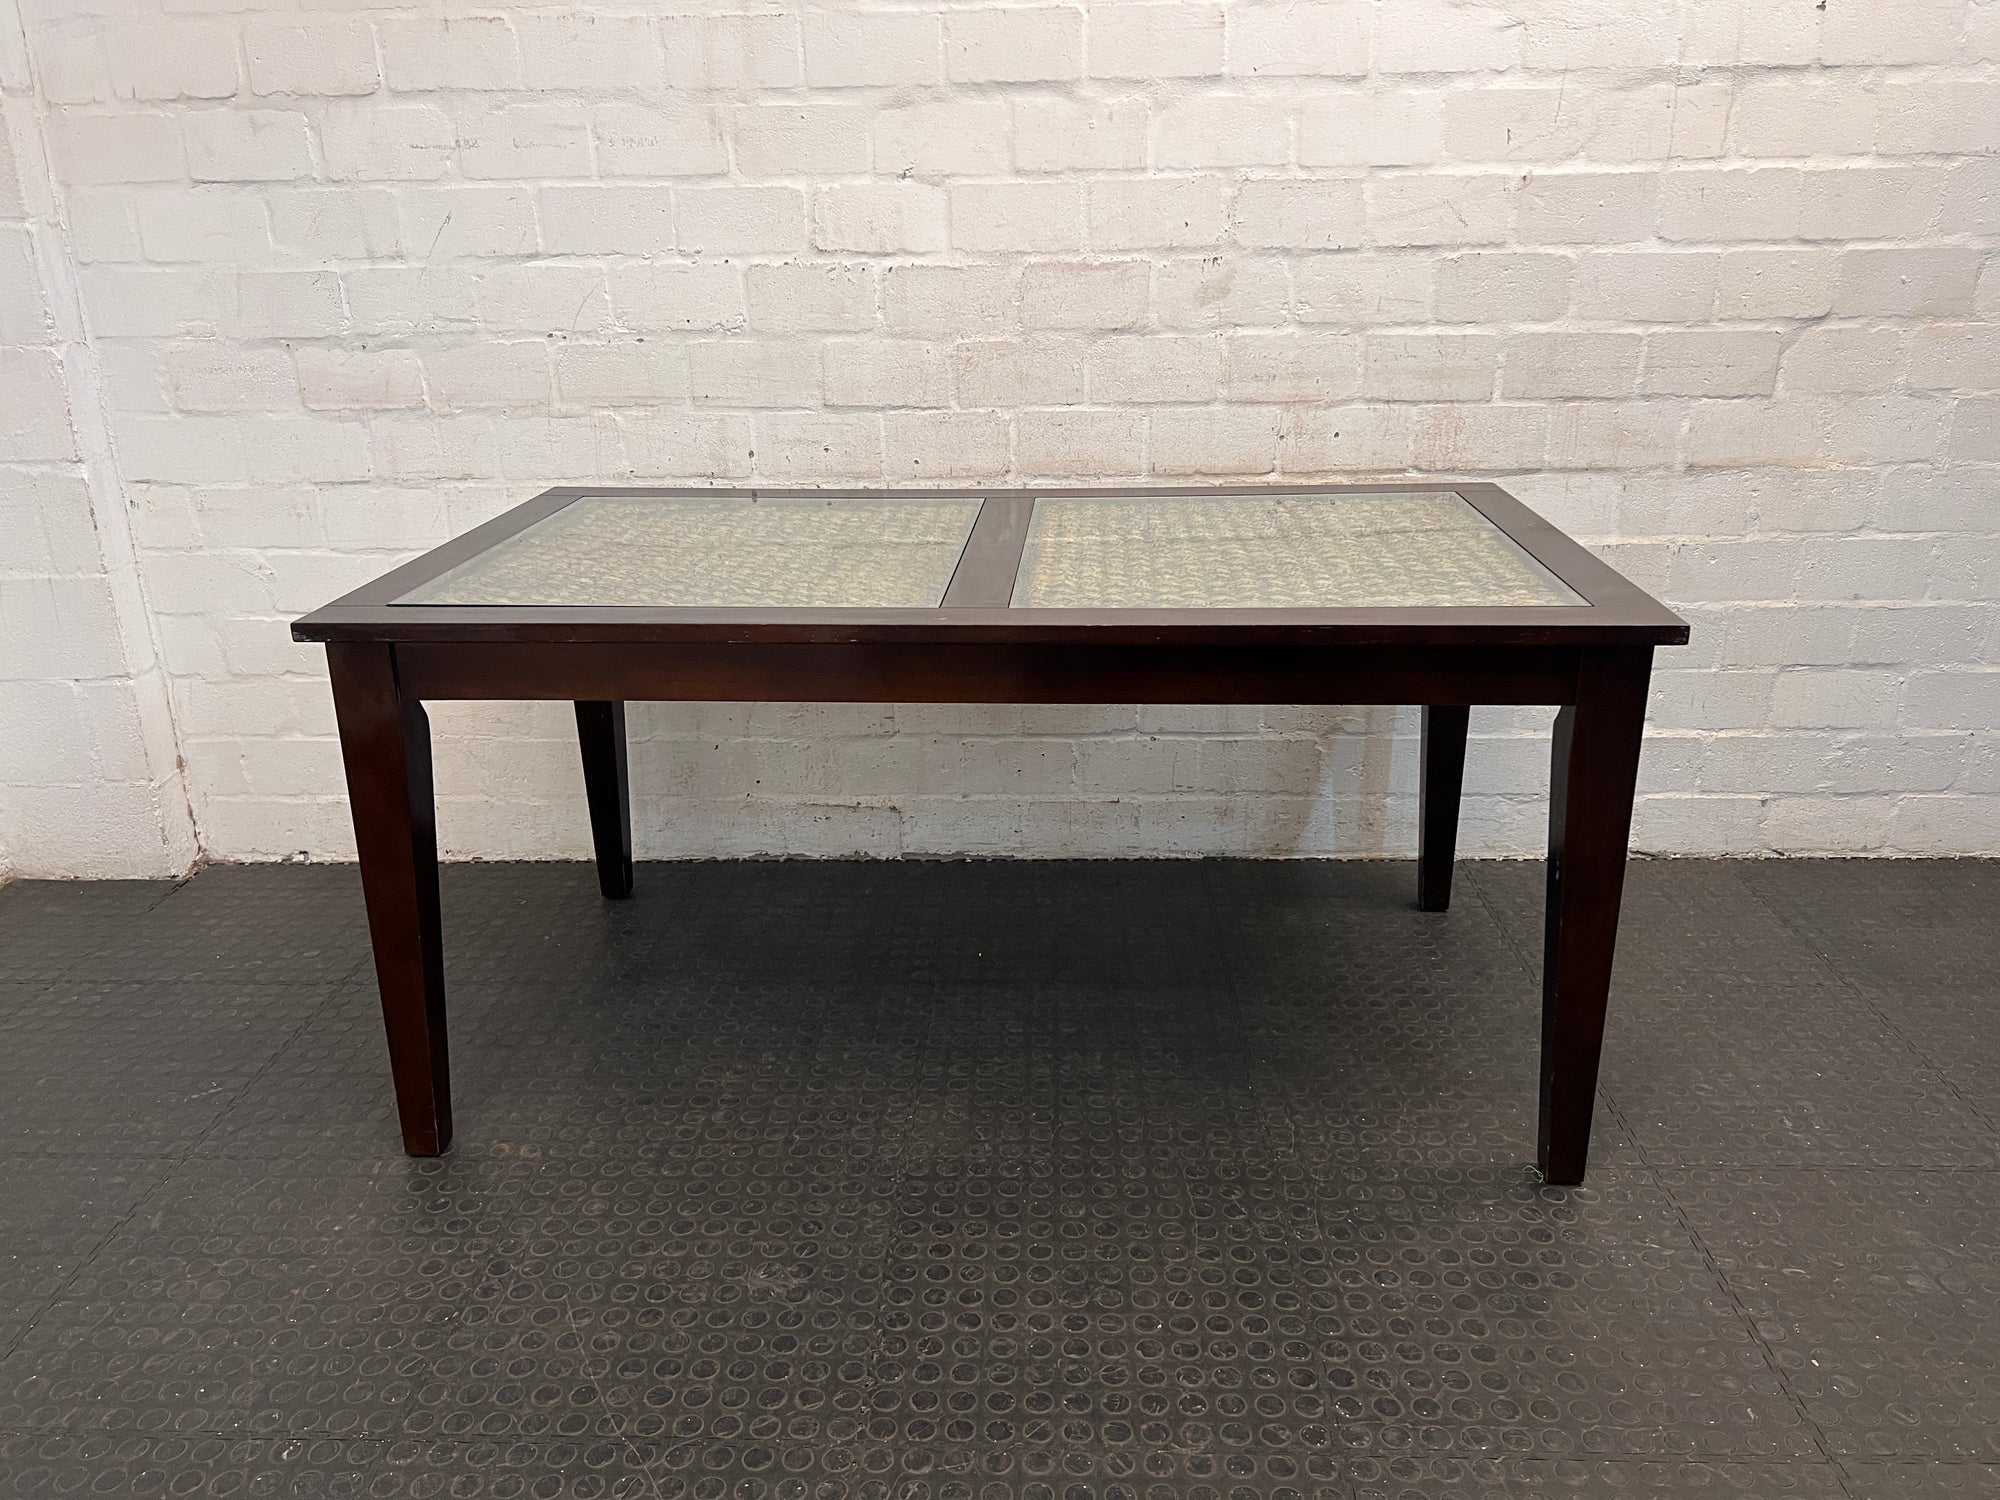 Six Seater Wicker Dining Room Table with Dark Wooden Frame and Glass Top